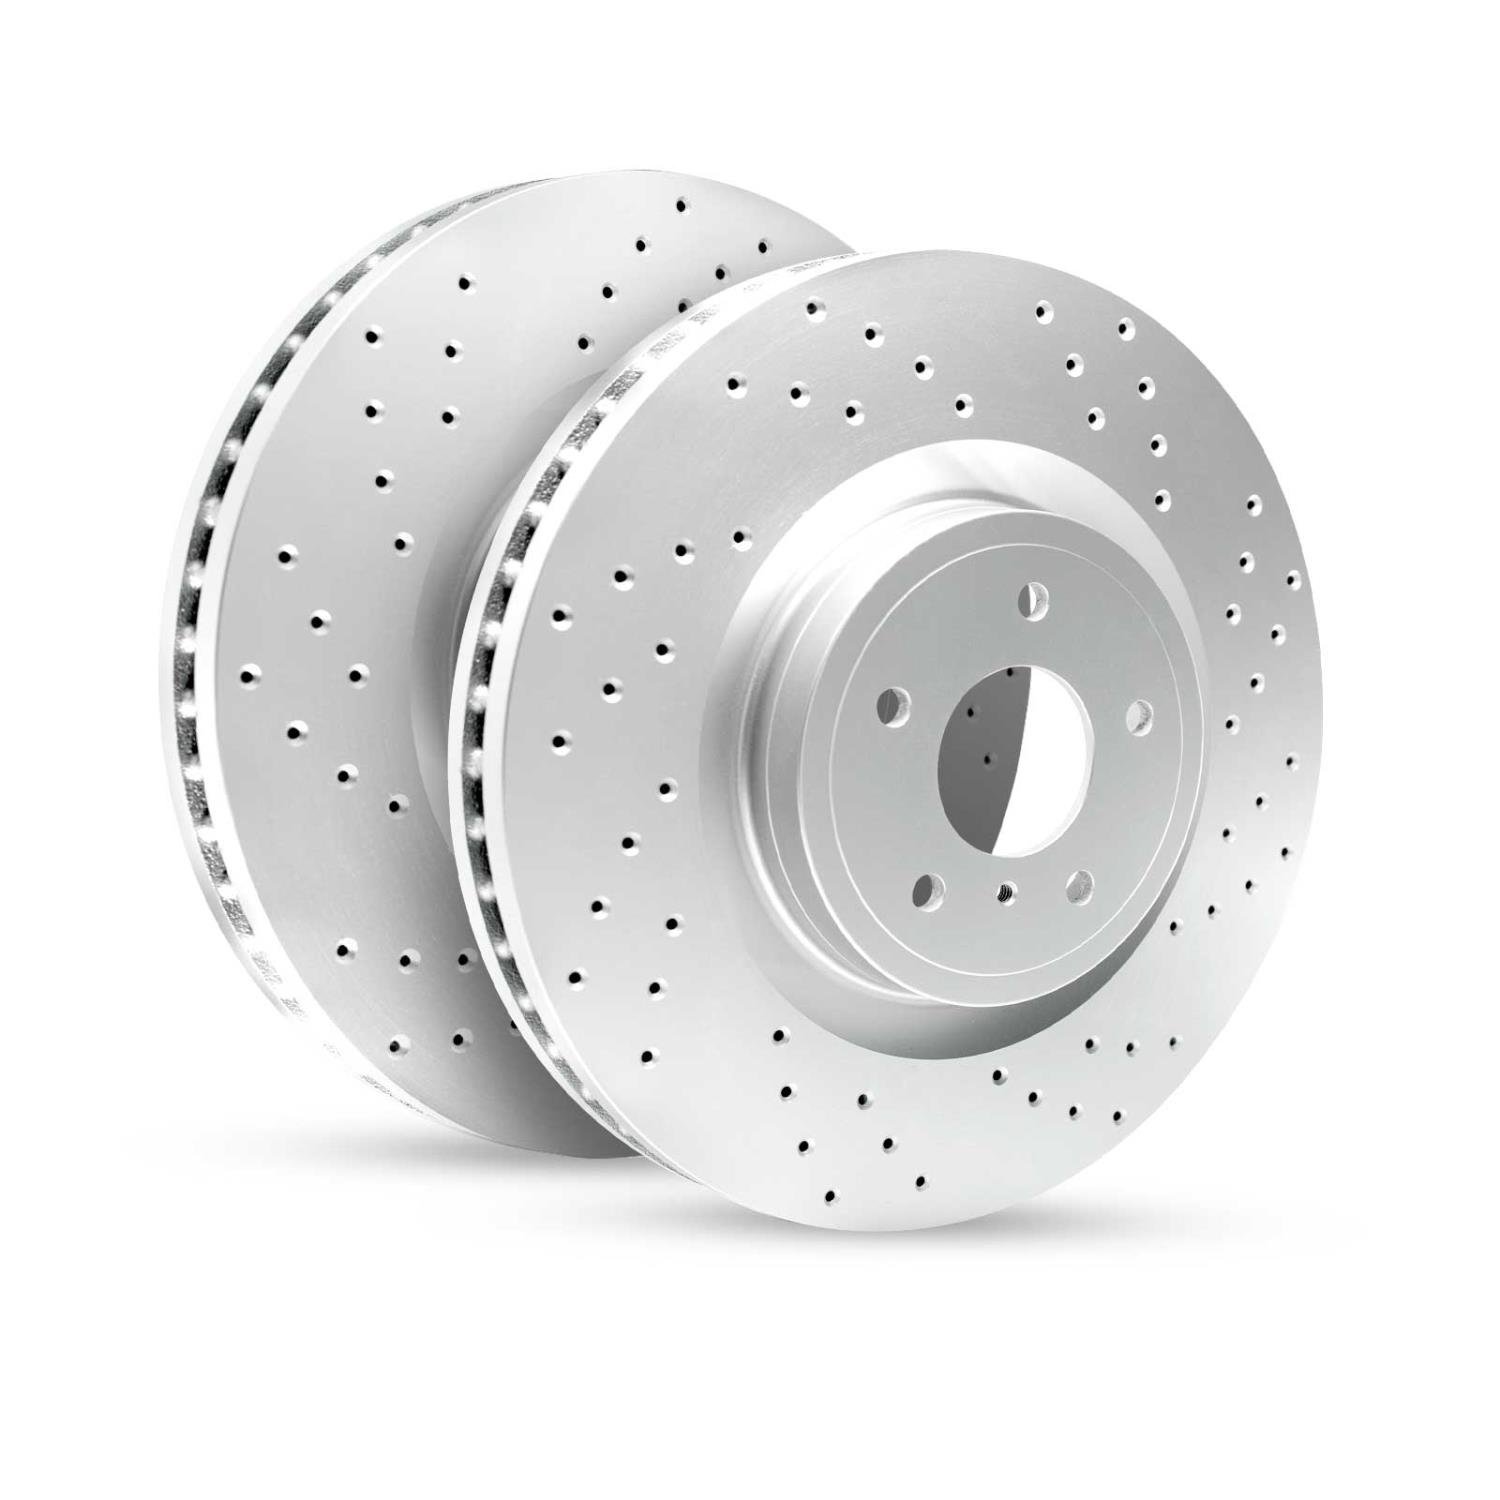 GEO-Carbon Drilled/Slotted Rotors, 2004-2019 Fits Multiple